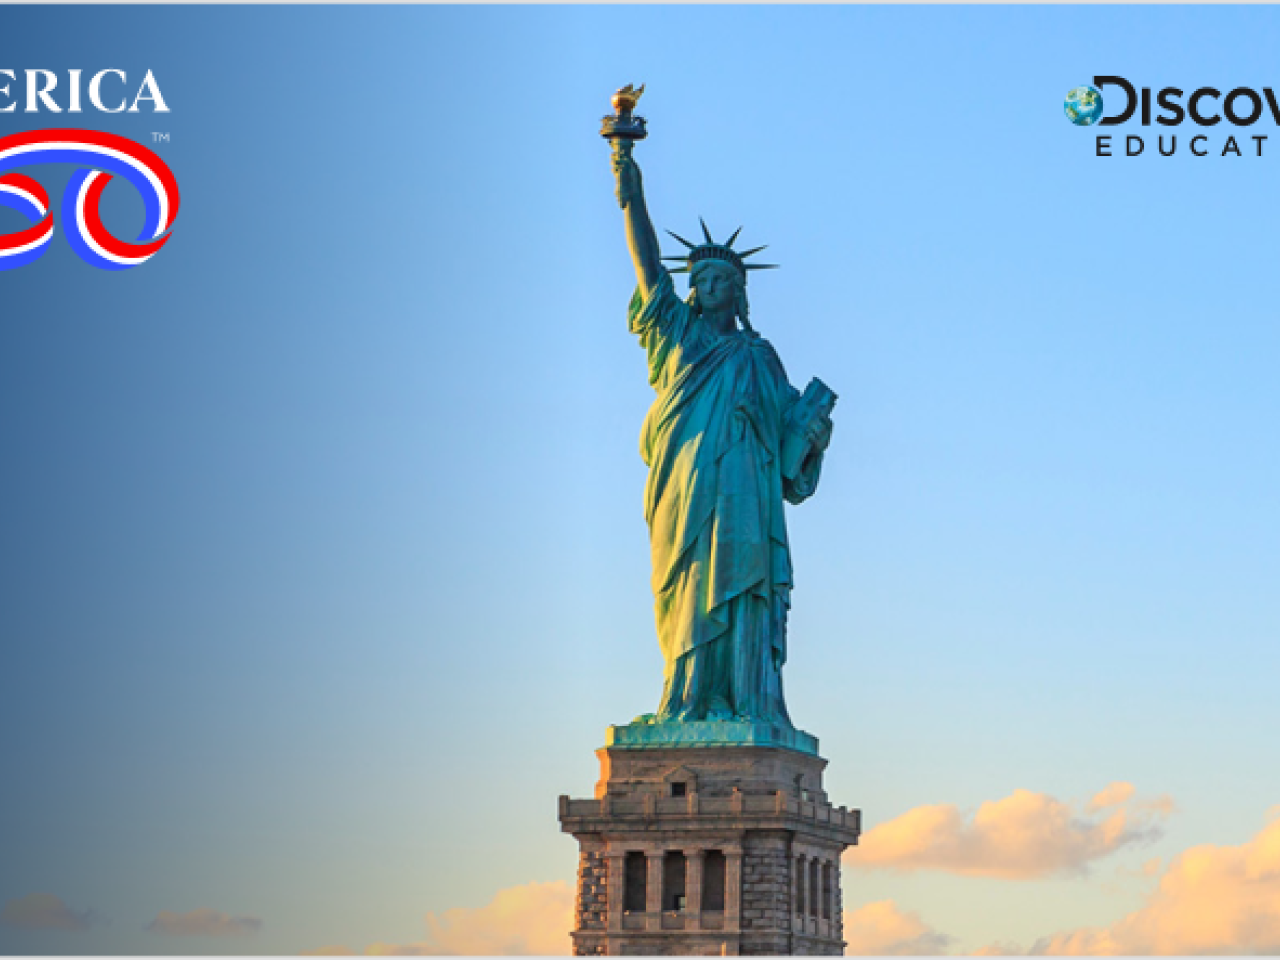 Statue of Liberty with America 250 and Discovery Education logos